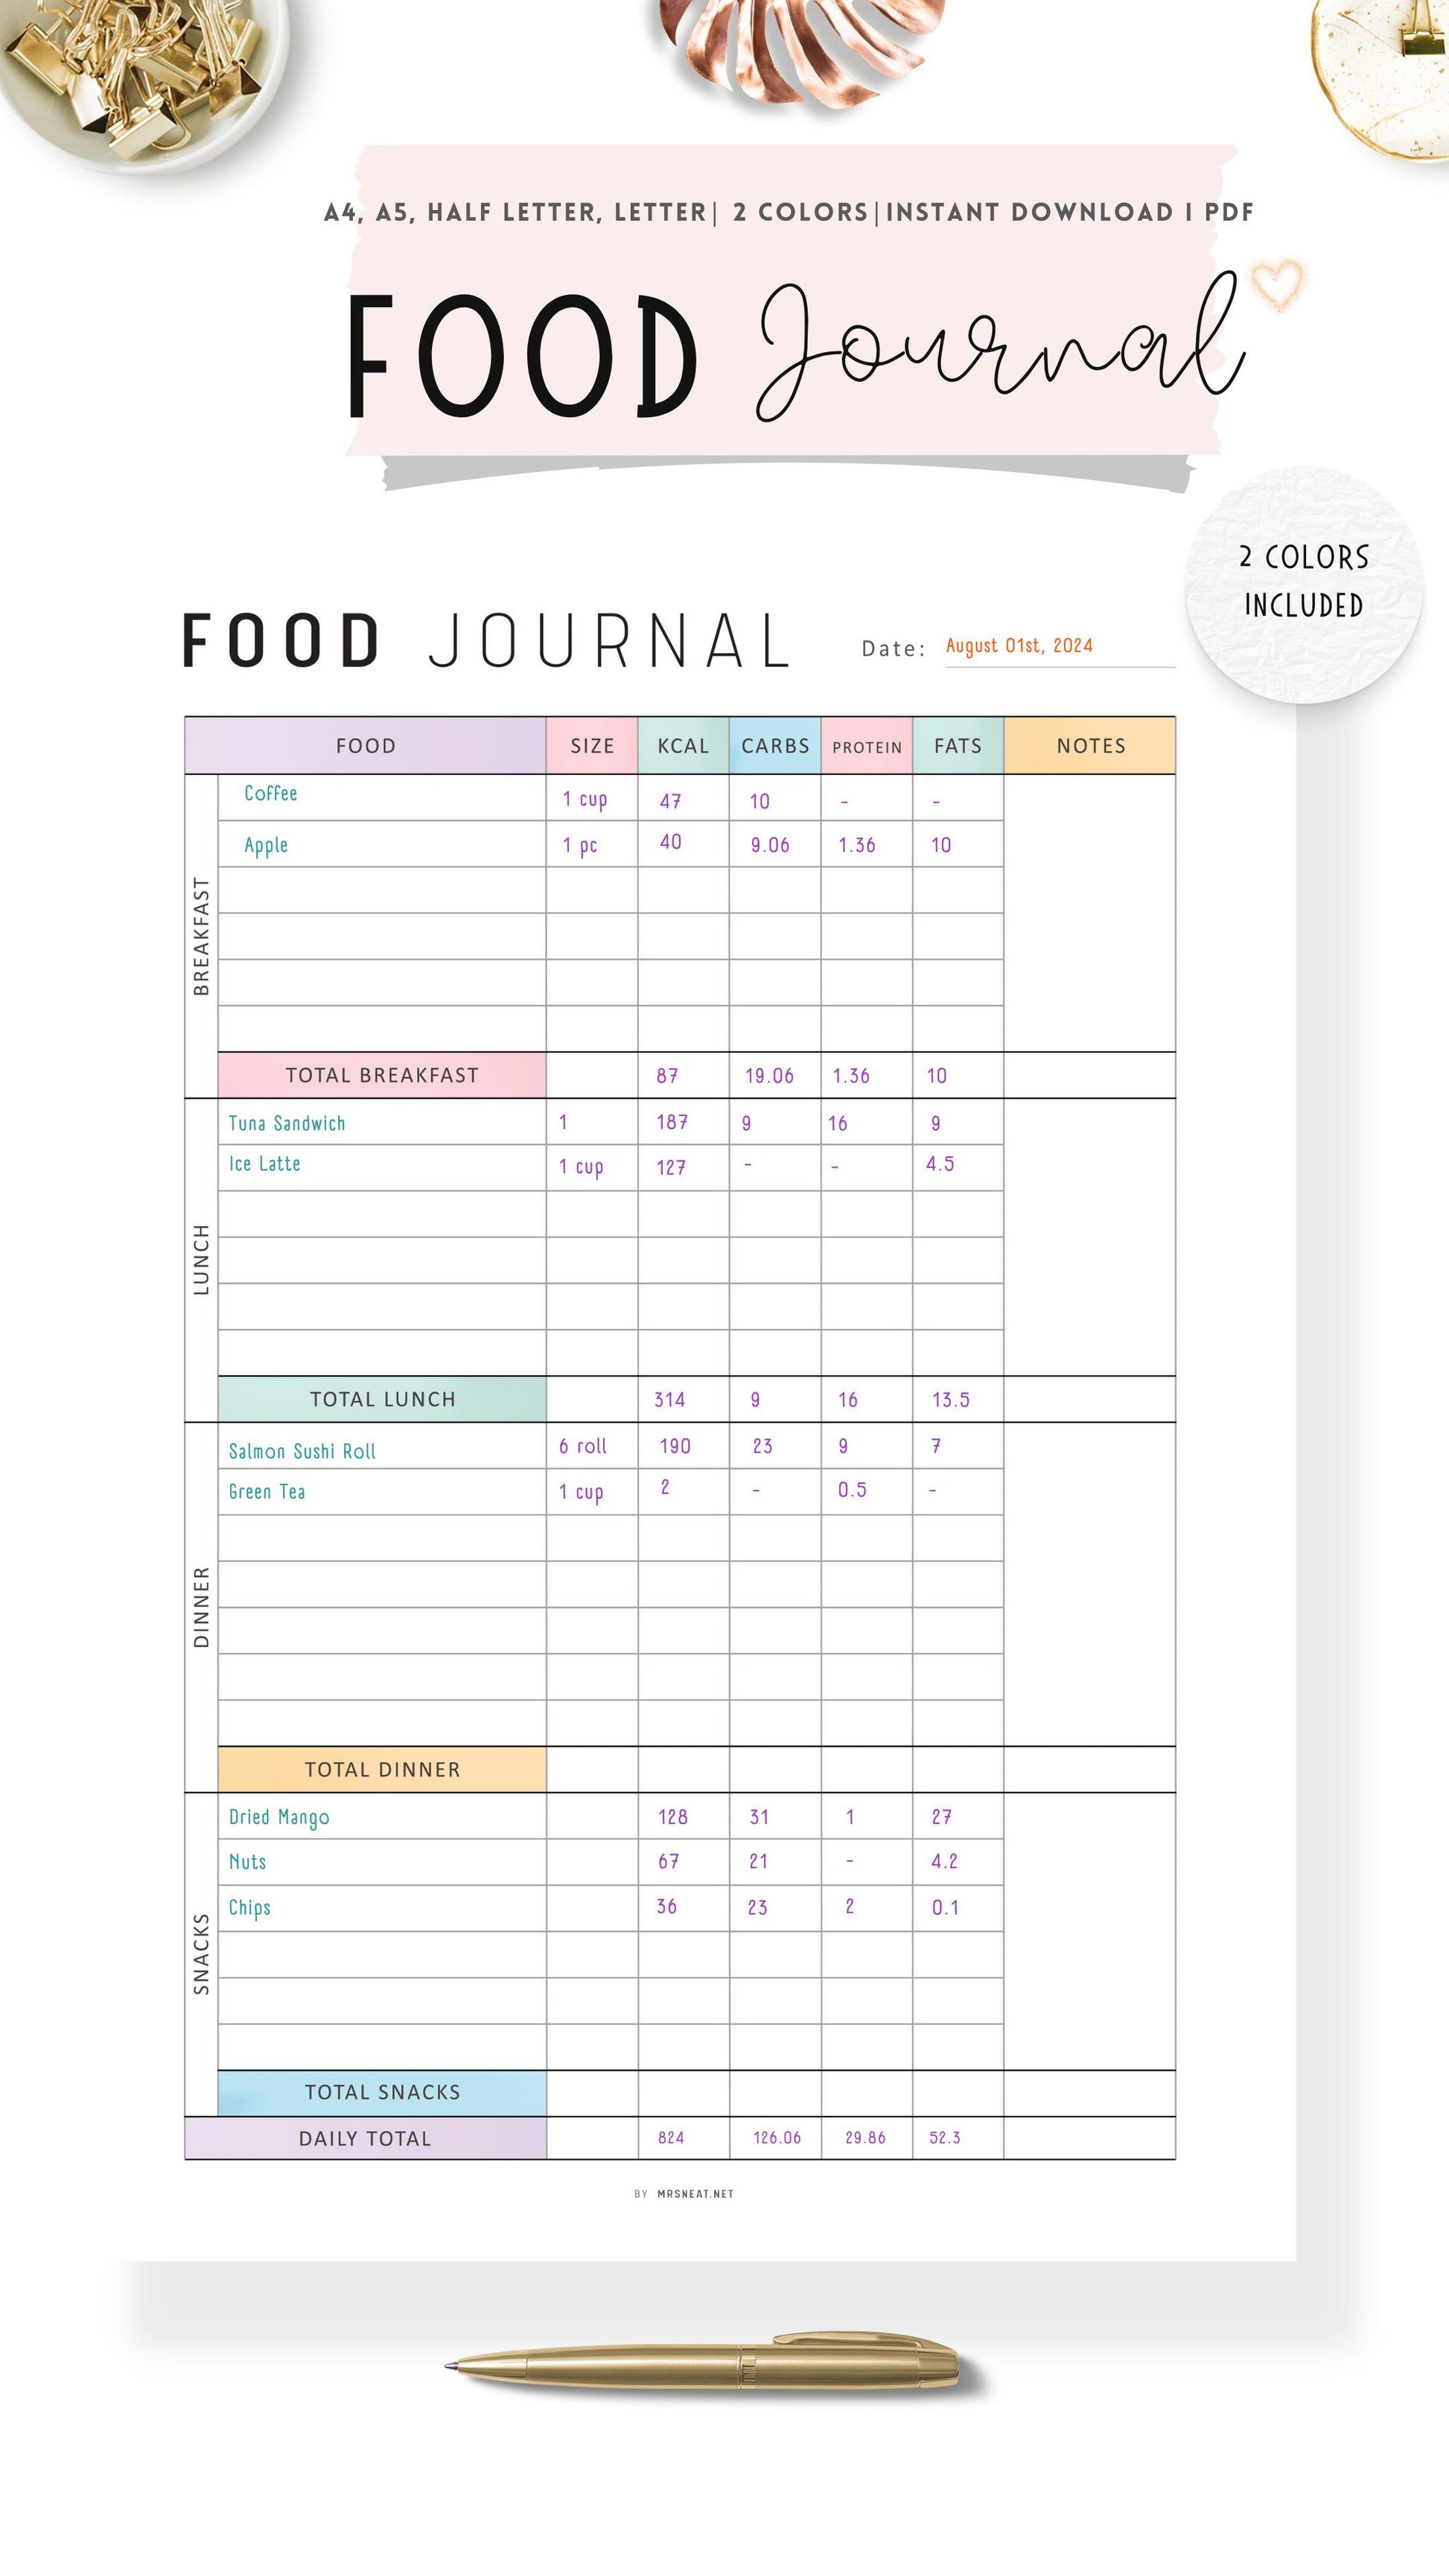 Cute Daily Calorie Tracker Template Printable, Calorie Counter PDF, My Food Diary, Digital Daily Food Journal, A4, A5, Letter, Half Letter, Colorful Page